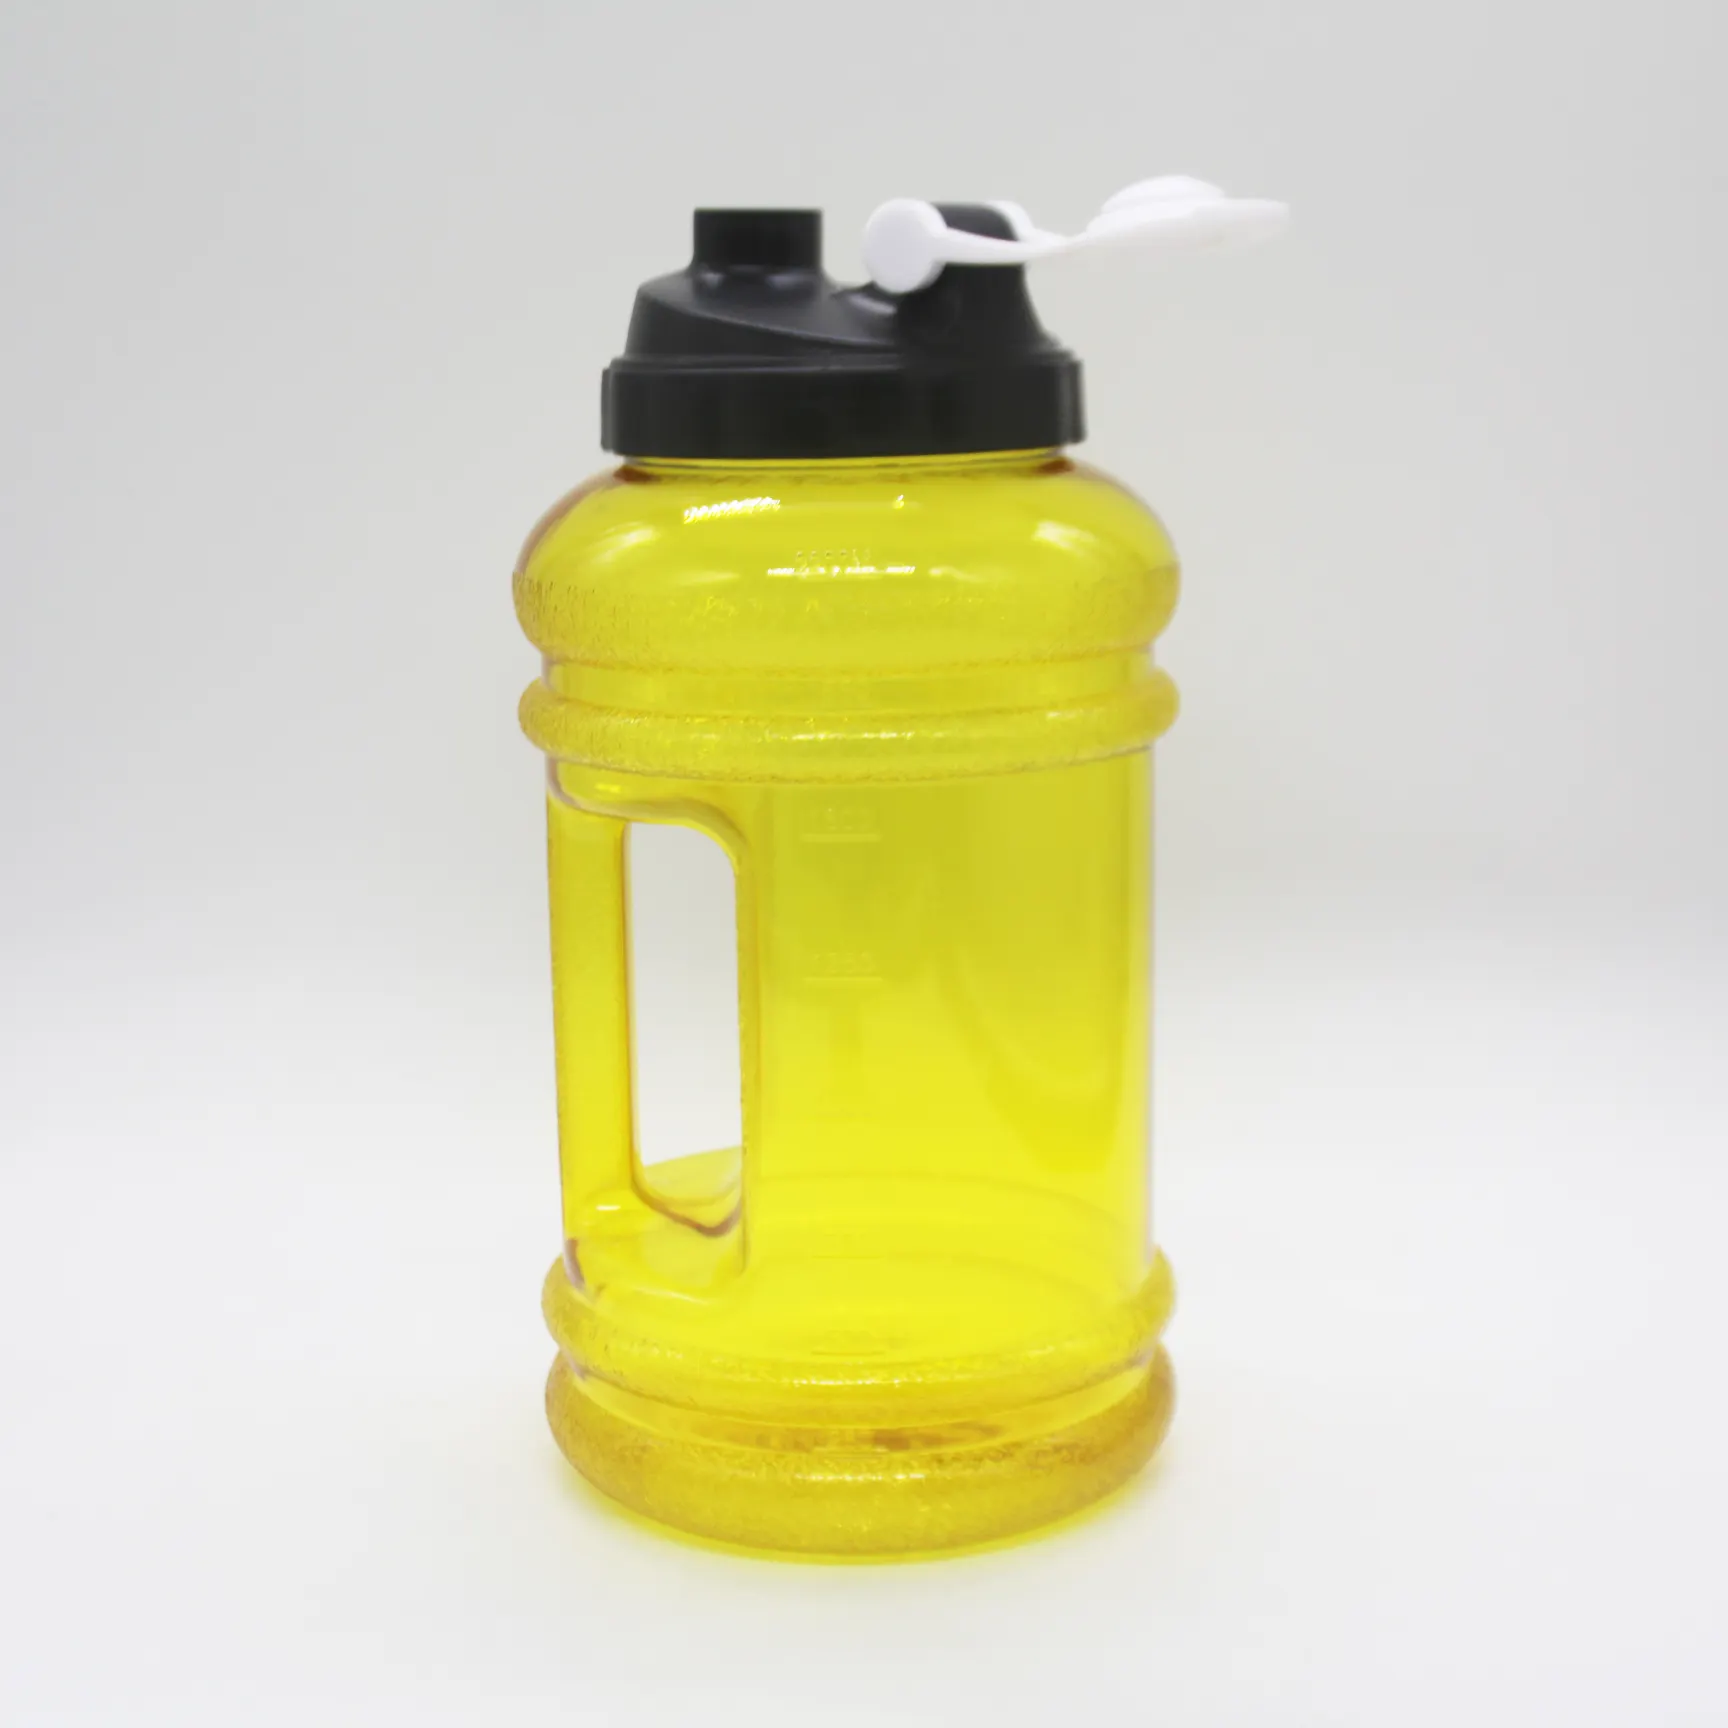 64oz Half Gallon Water Bottle with Integrated Handle Reusable Durable BPA Free Plastic hydro bottle Gallon Bottle Hydro Jug